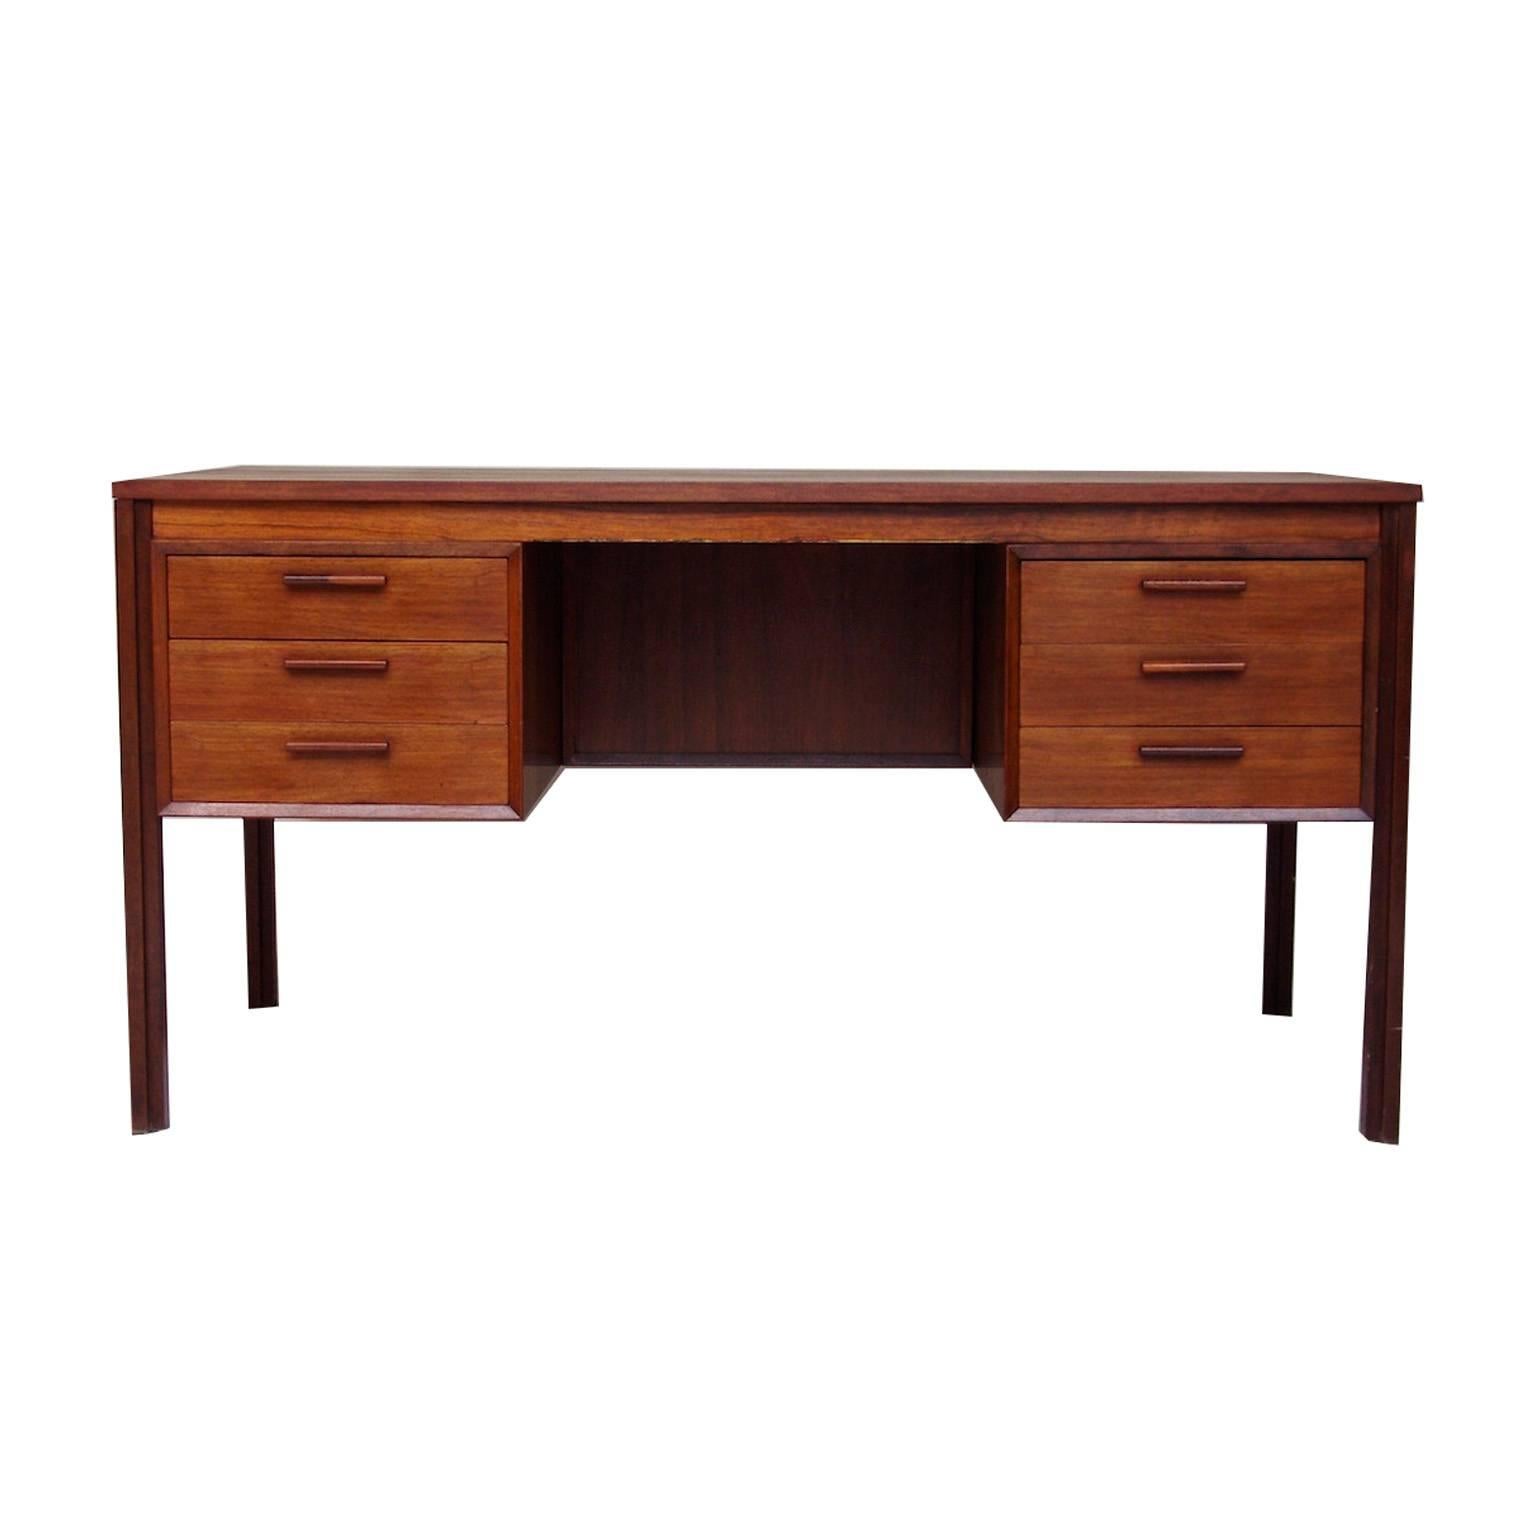 Rosewood desk in the style of Gunni Omann.